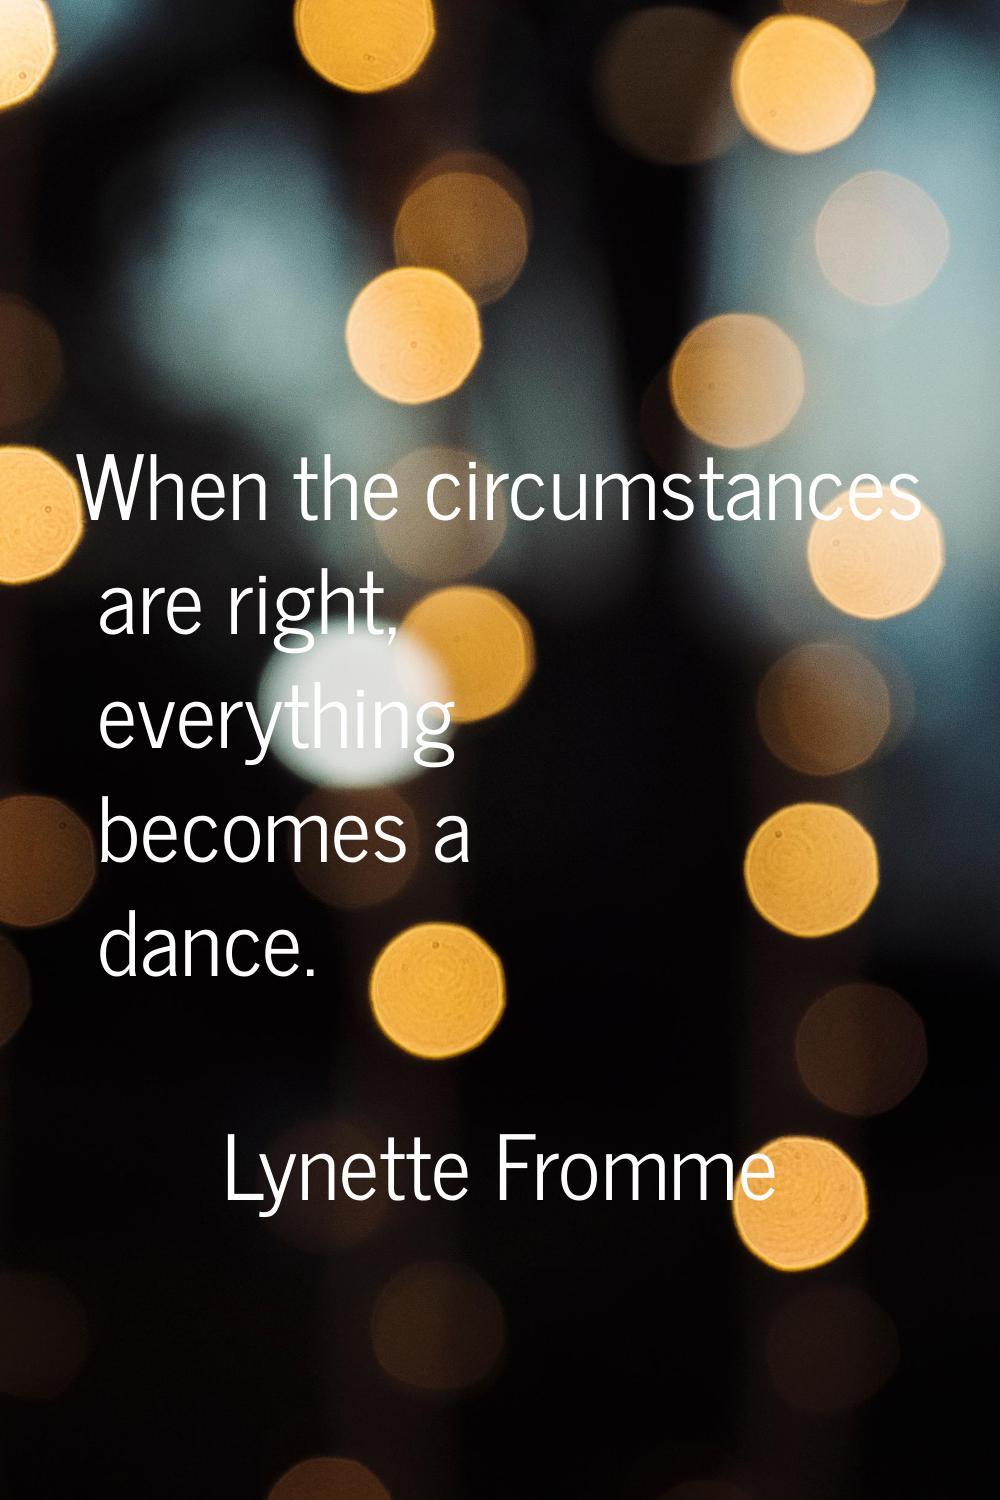 When the circumstances are right, everything becomes a dance.